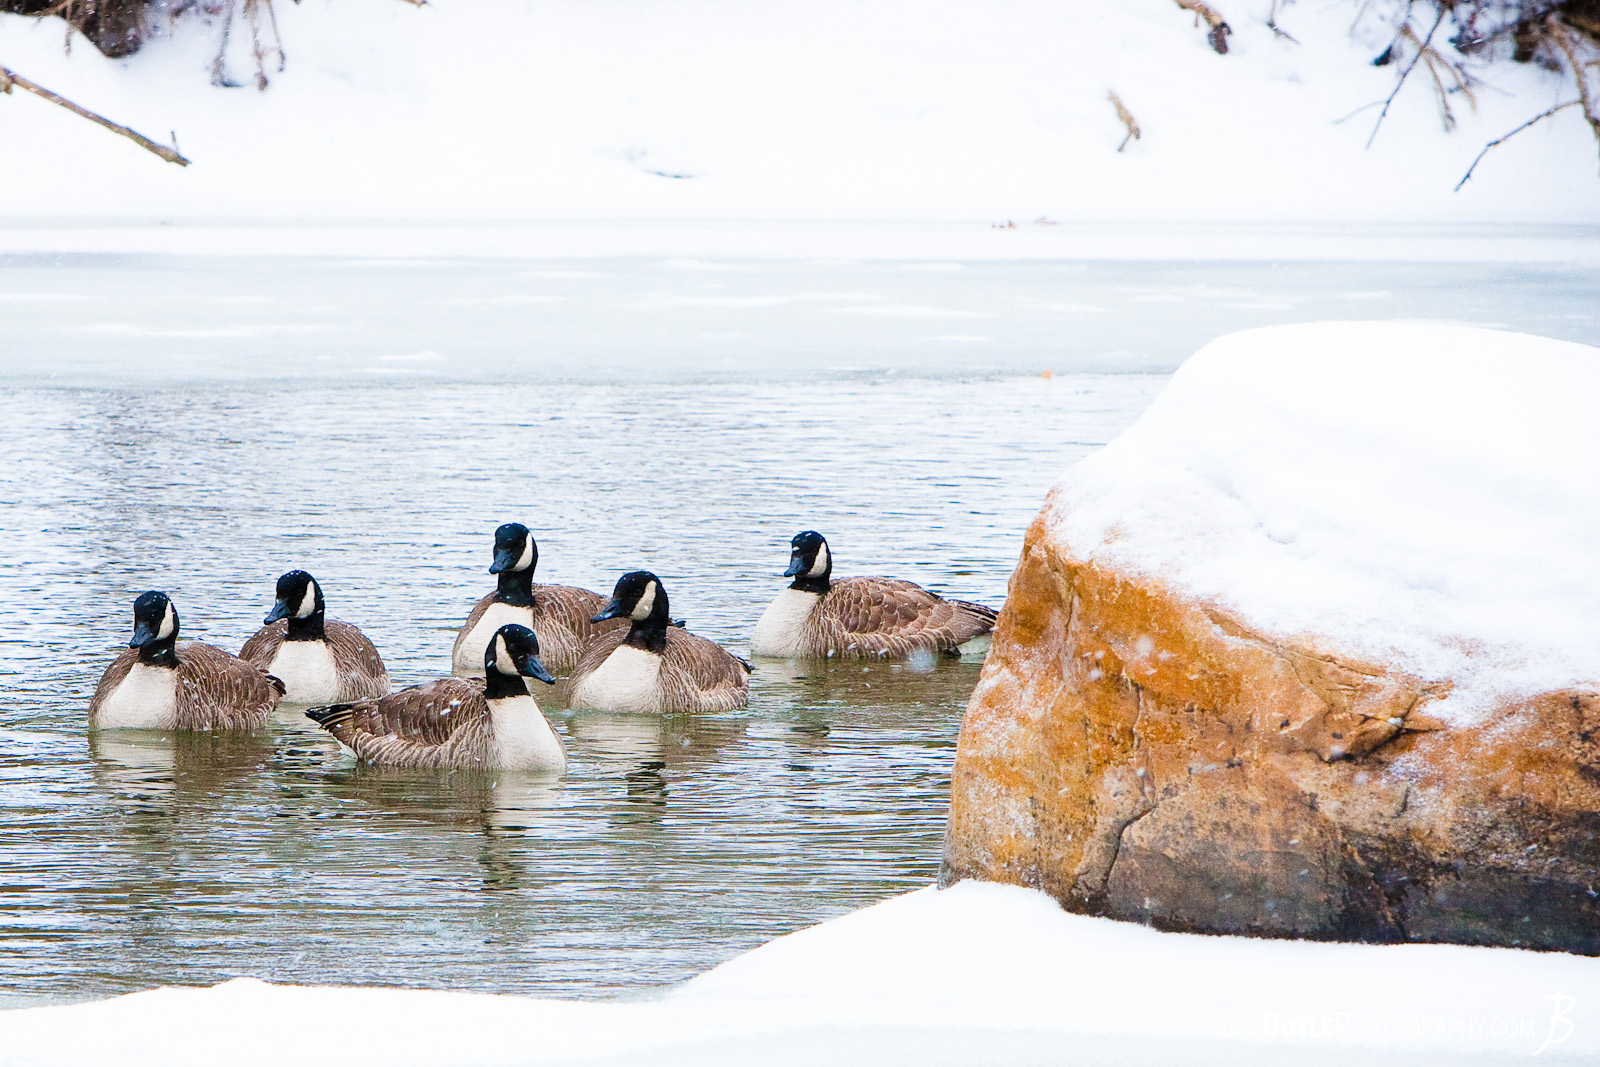  I captured these geese in the Rocky River Metroparks on a calm, snowy day. 